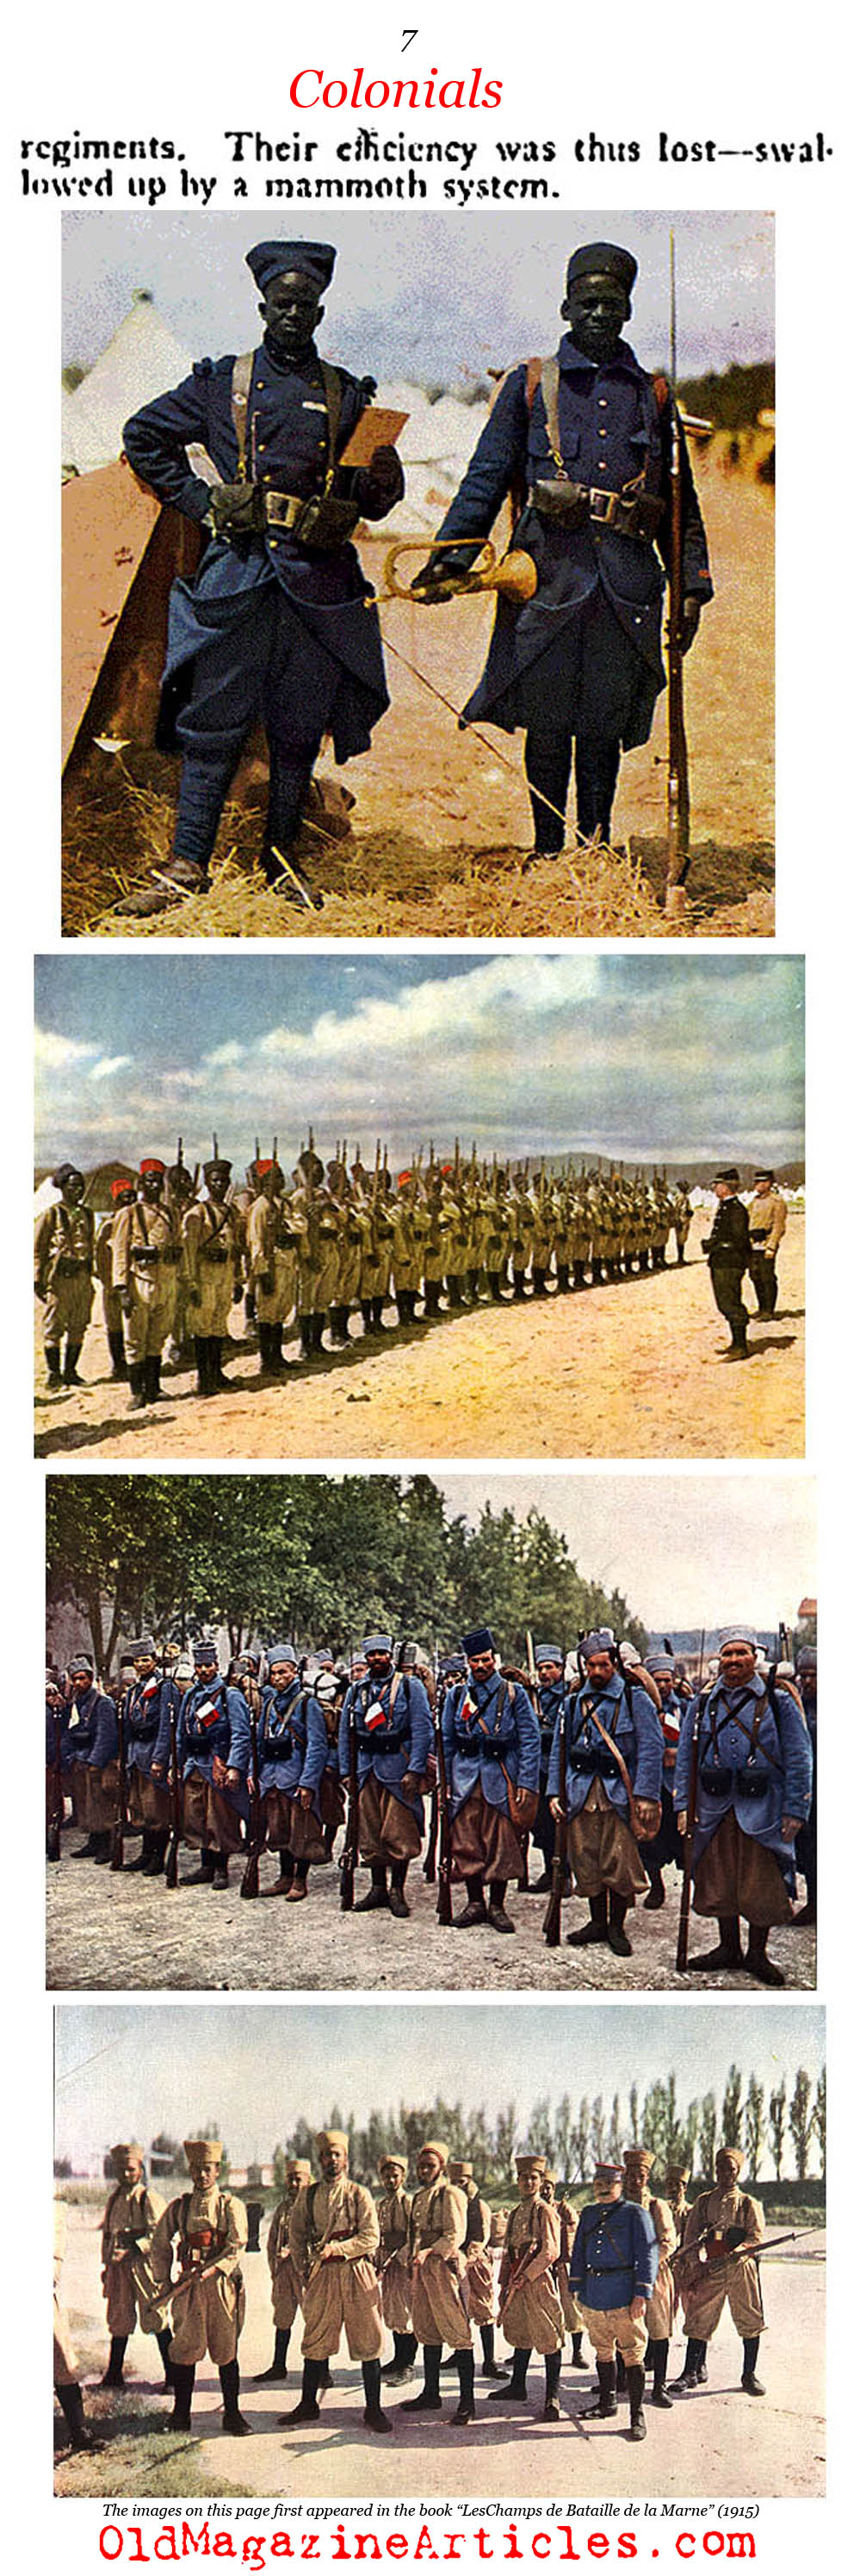 The French Army in Africa (The Commonweal, 1941)